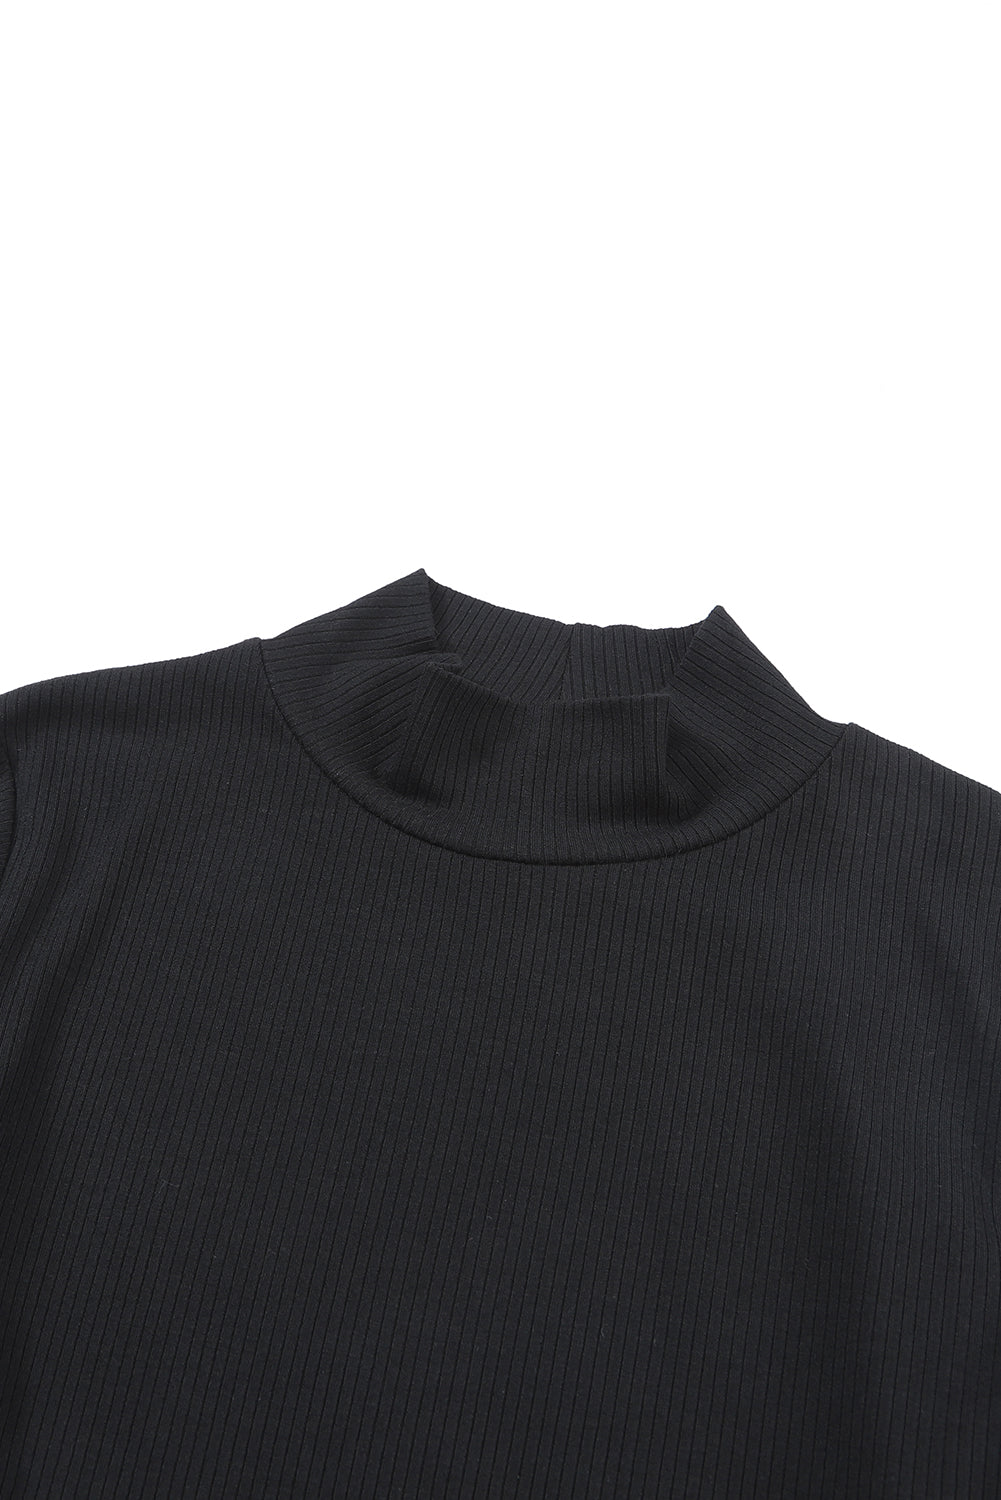 Black Ribbed Knit High Neck Long Sleeve Top